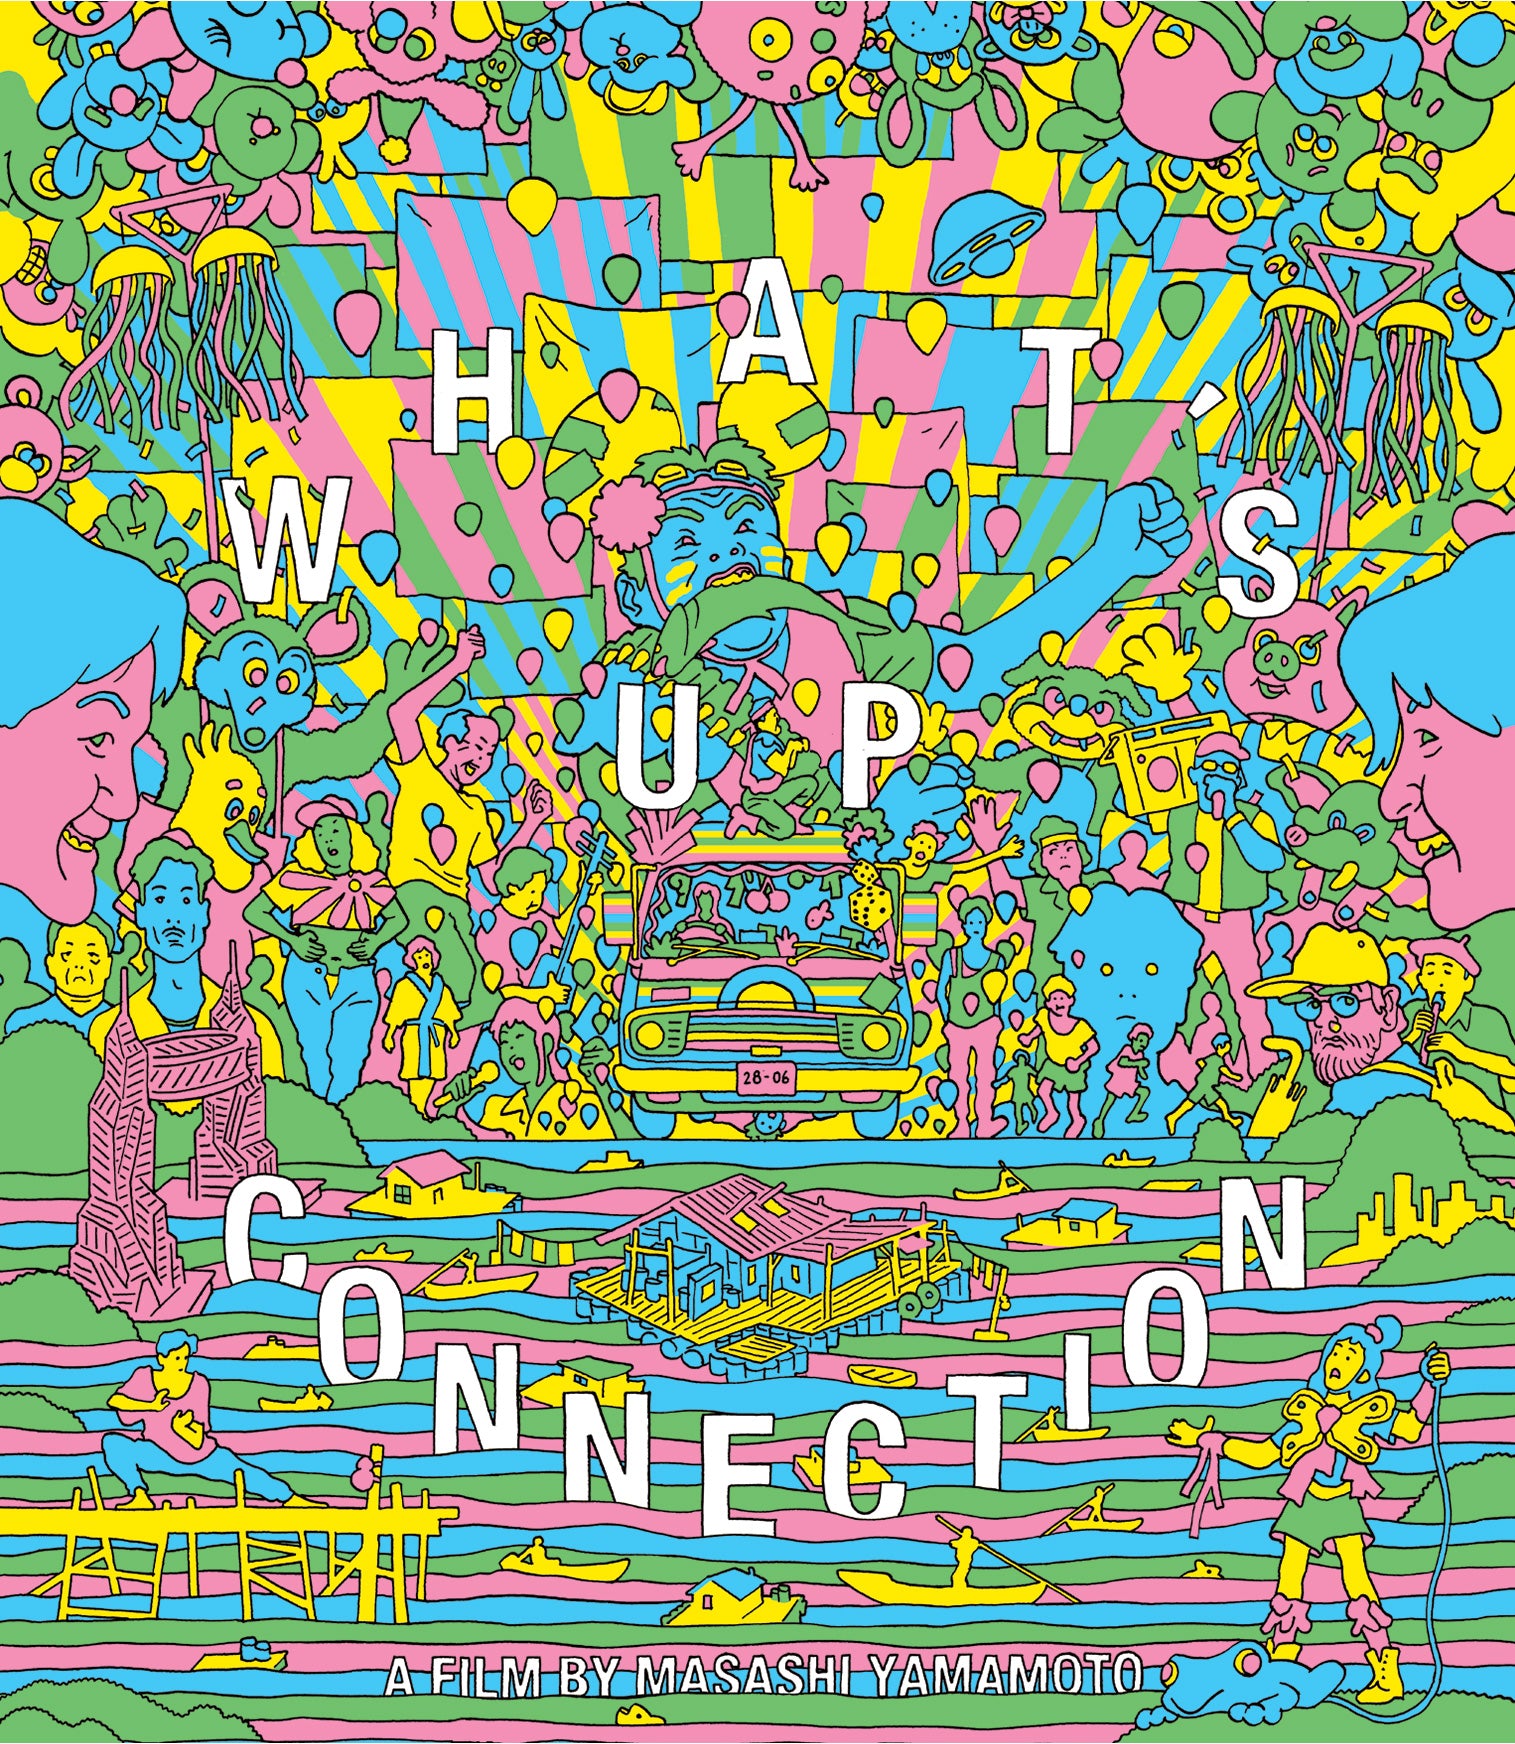 WHAT'S UP CONNECTION BLU-RAY